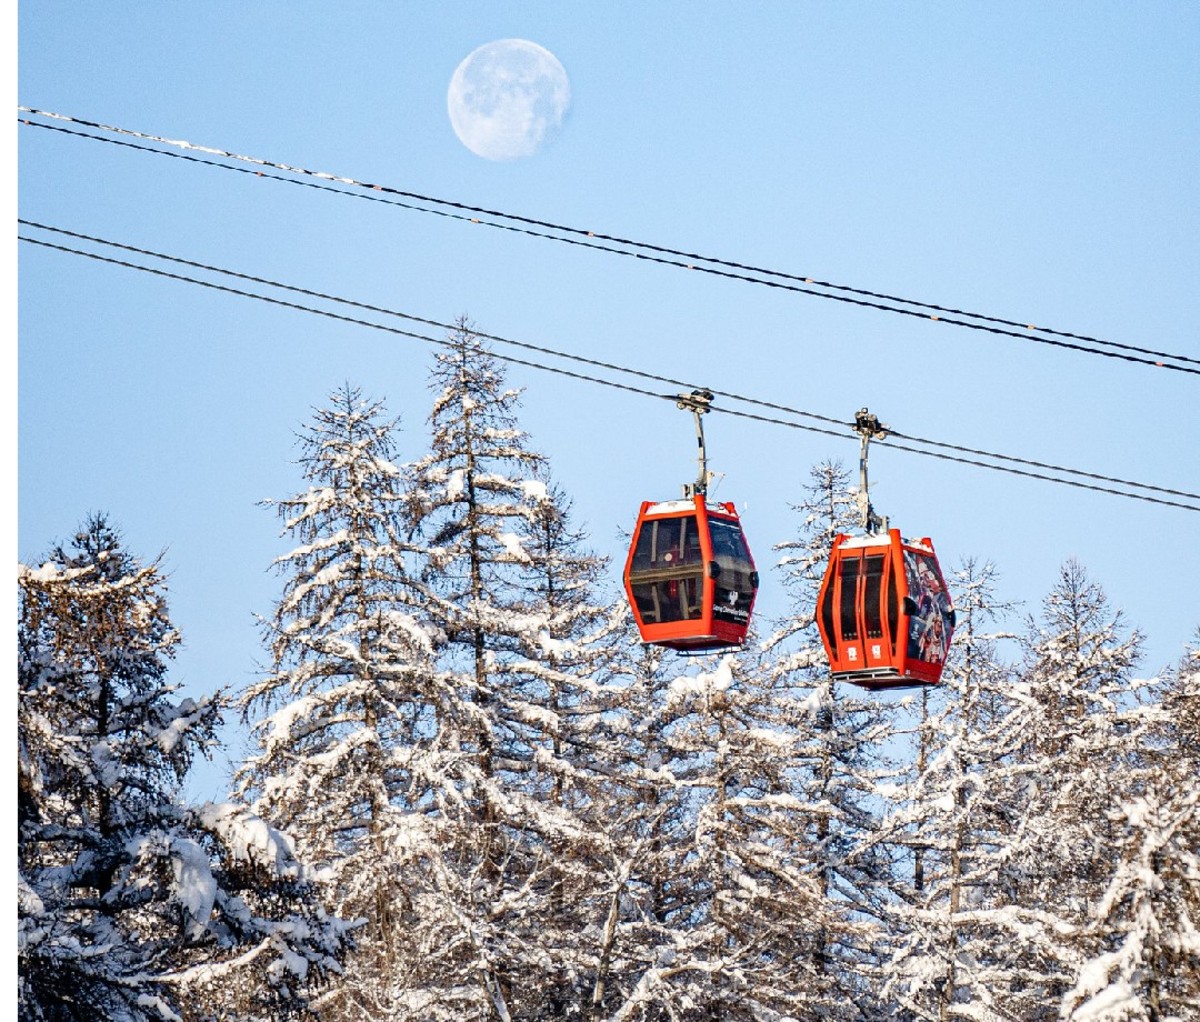 Two red gondolas in the pine trees with a full moon in the background, day.